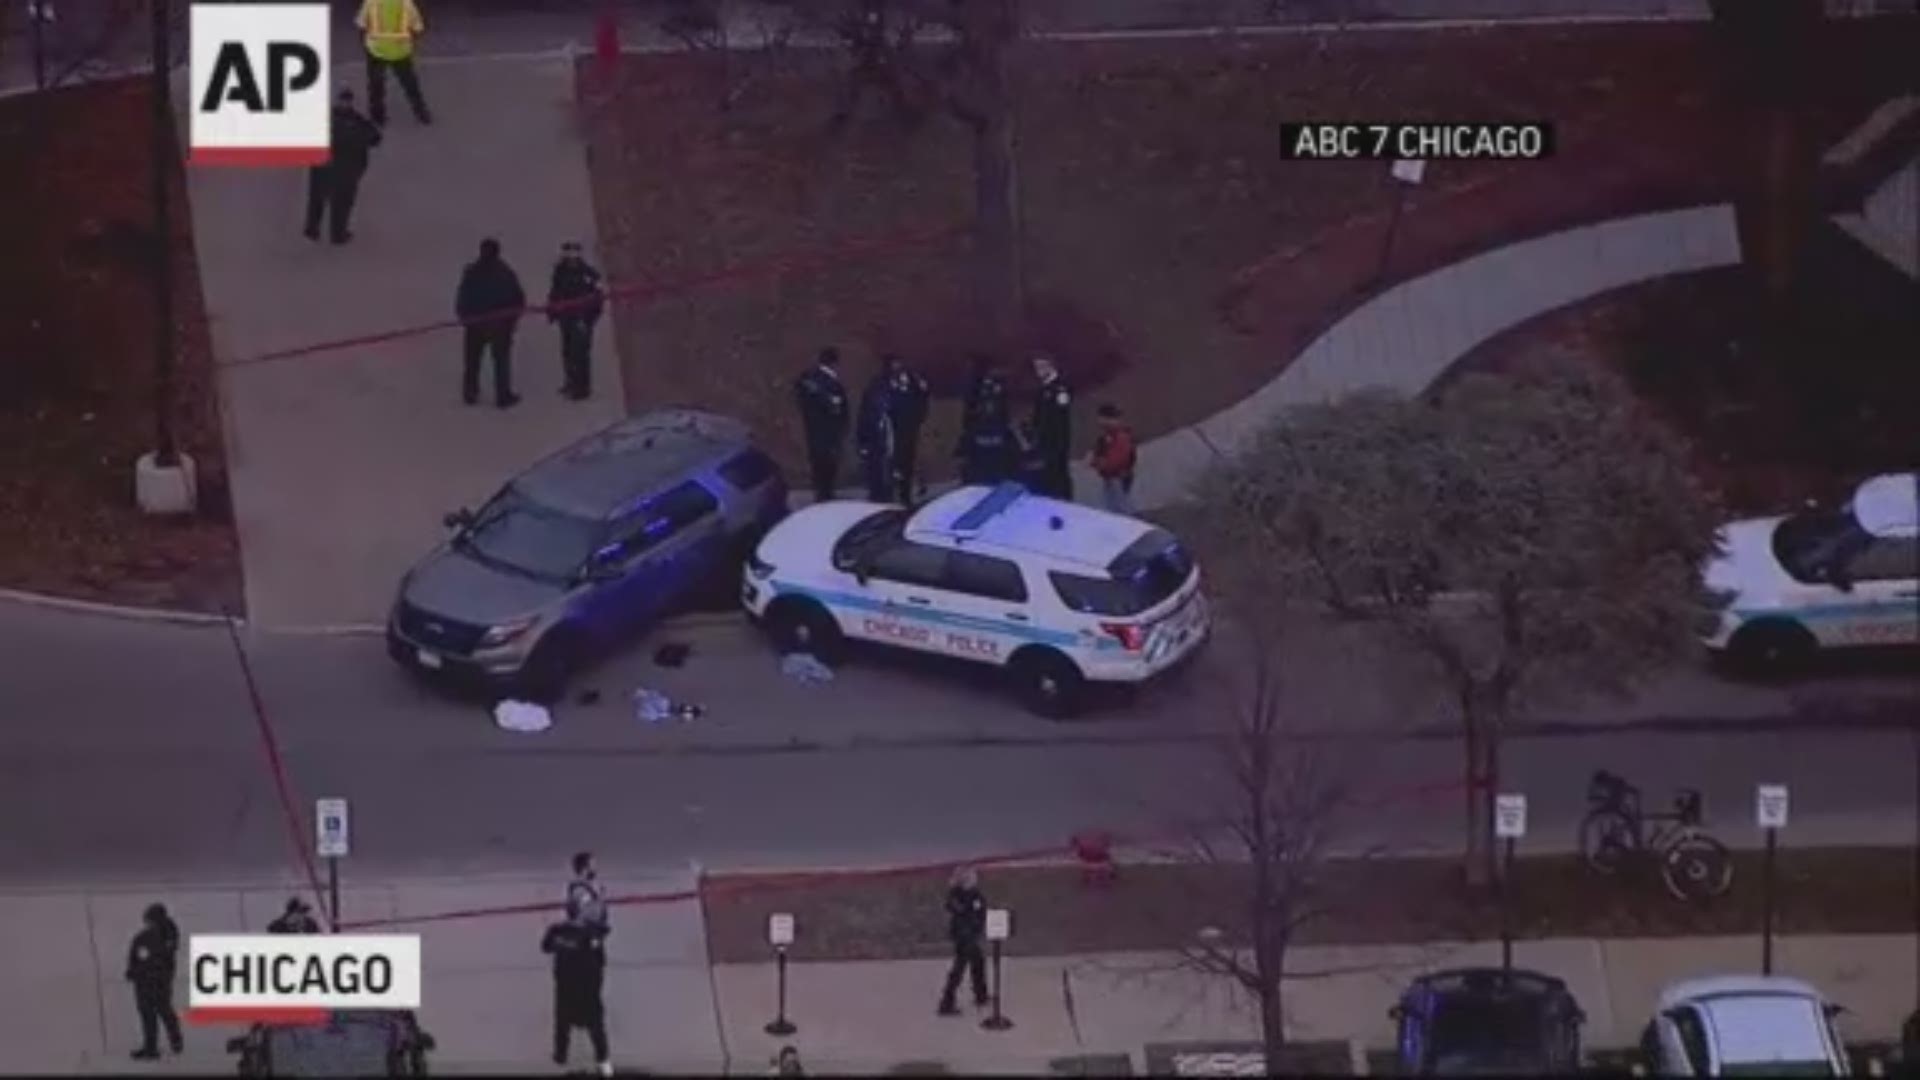 Police in Chicago say a suspected gunman is dead and an officer and three others are in critical condition in a shooting at a hospital in the city. (ABC 7 Chicago via AP)